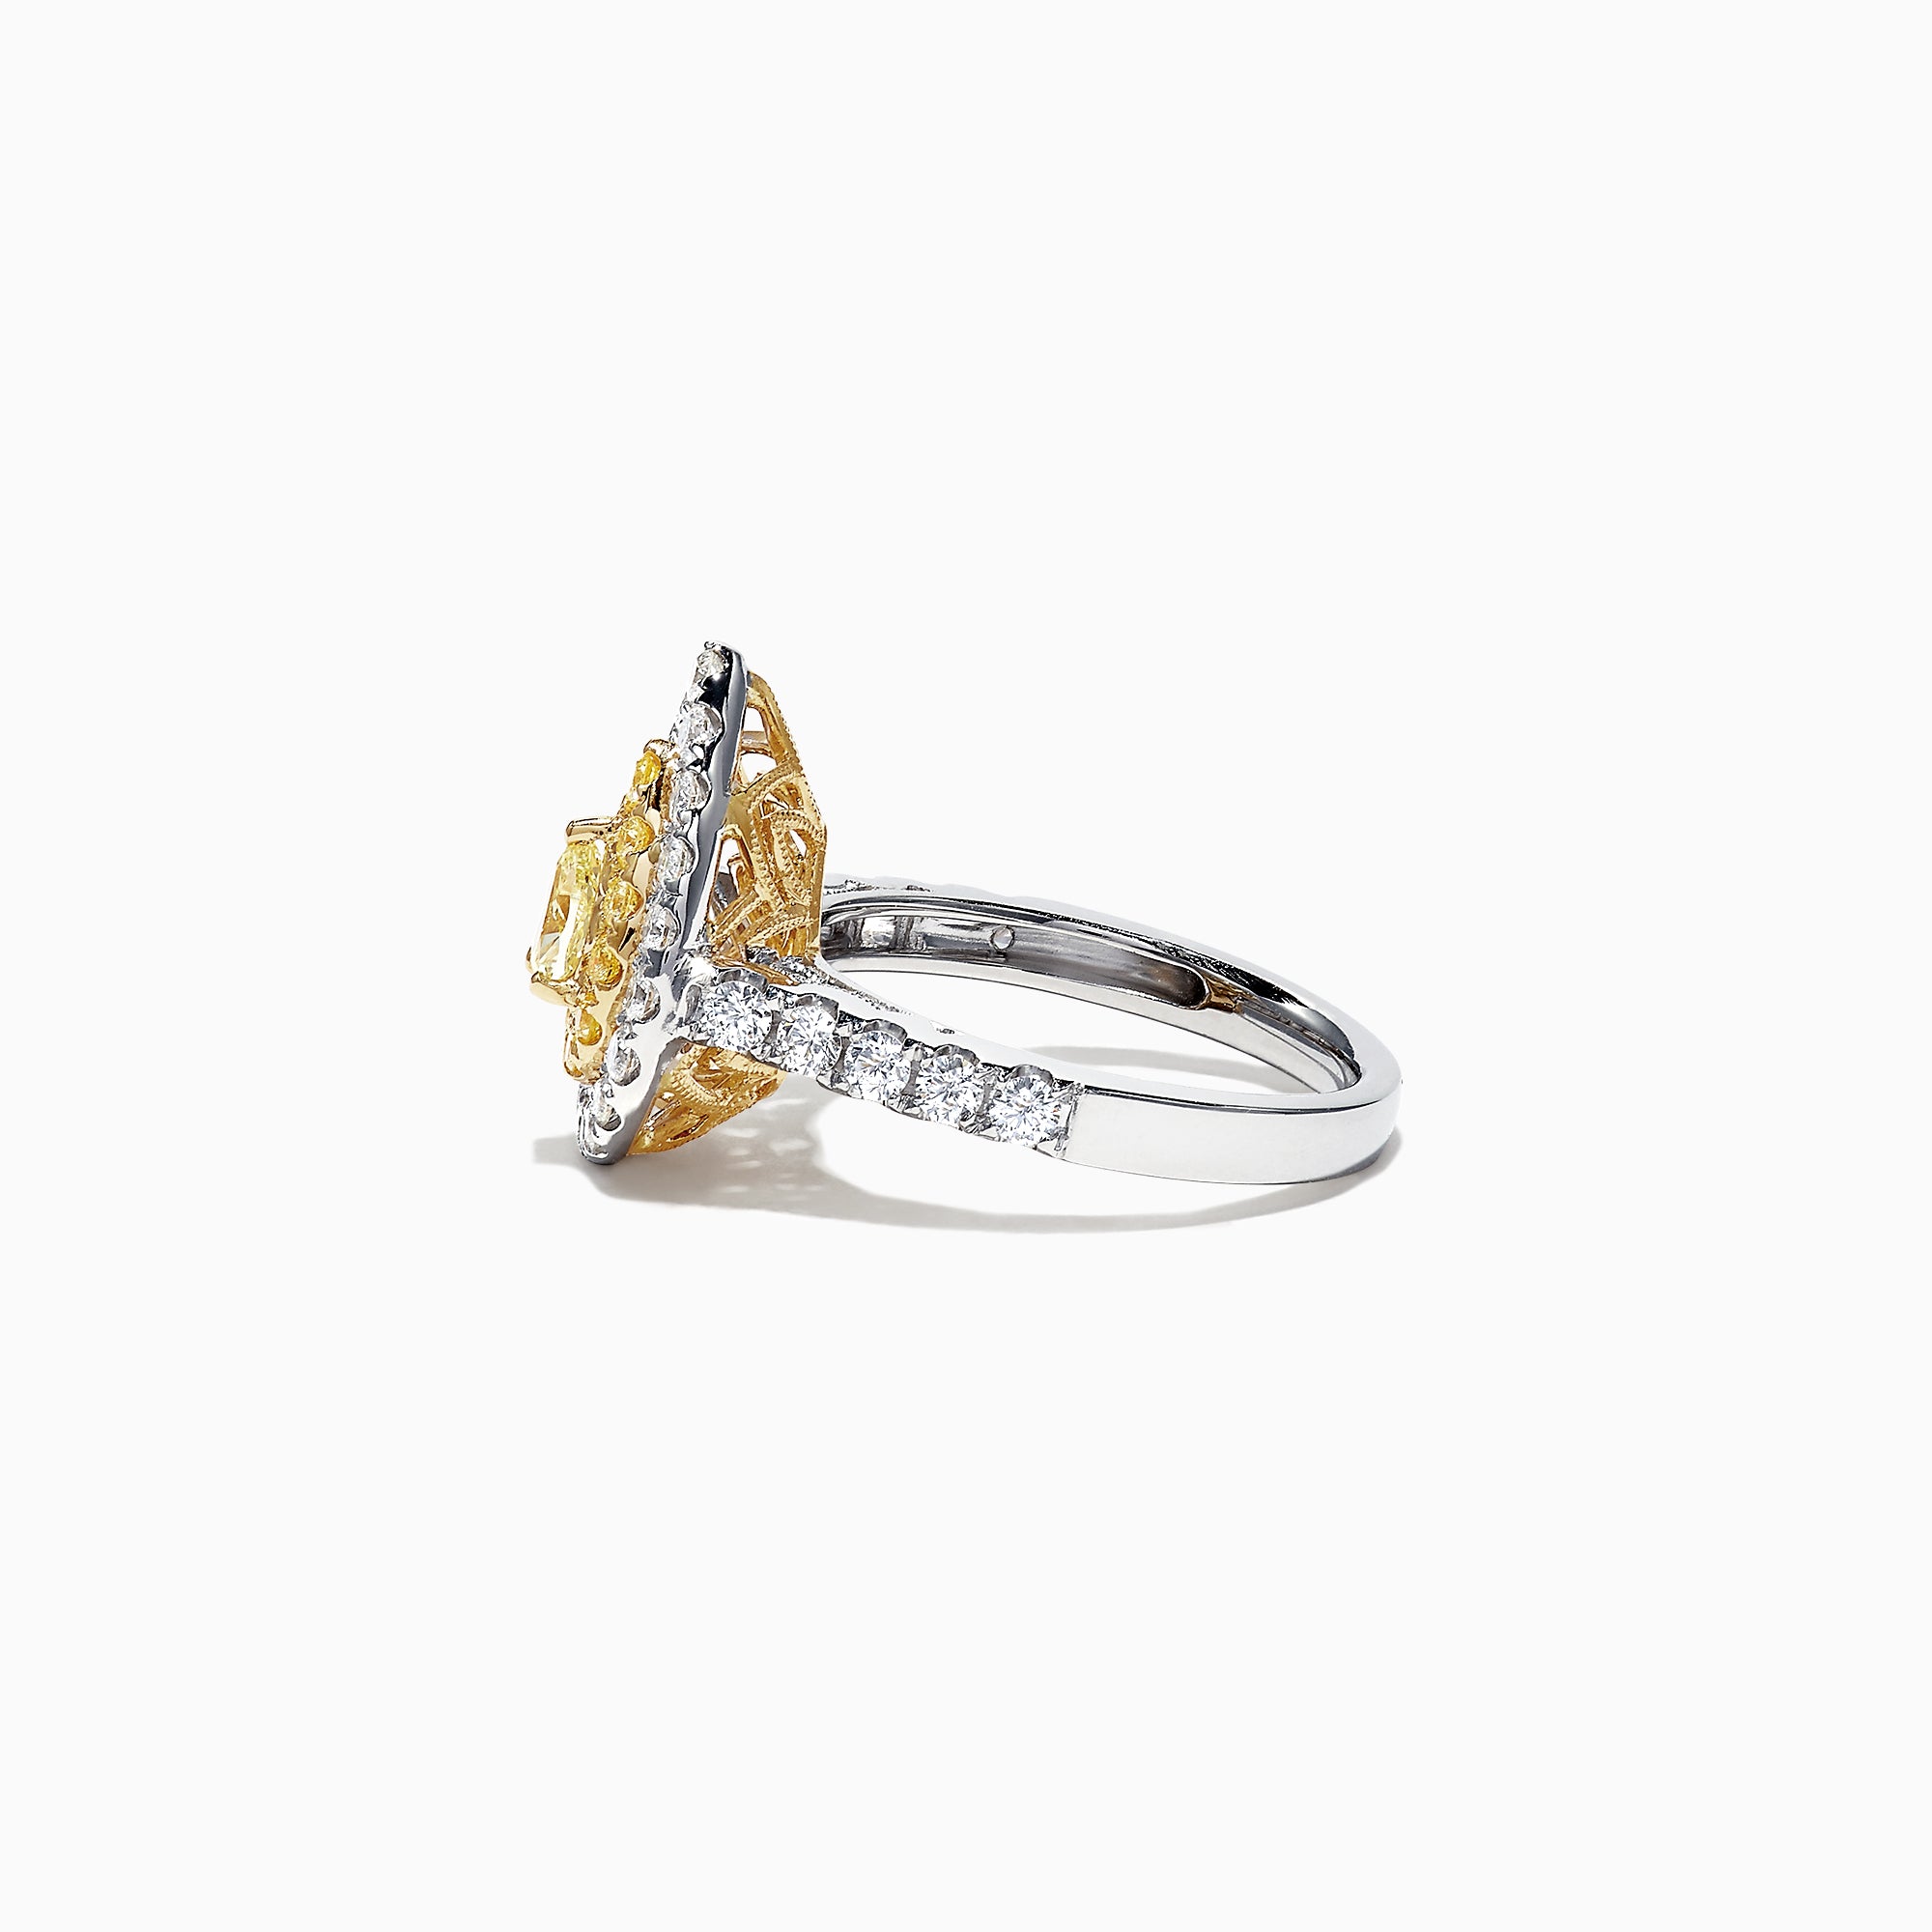 Effy Canare 18K Two-Tone Gold Yellow and White Diamond Ring, 1.21 TCW